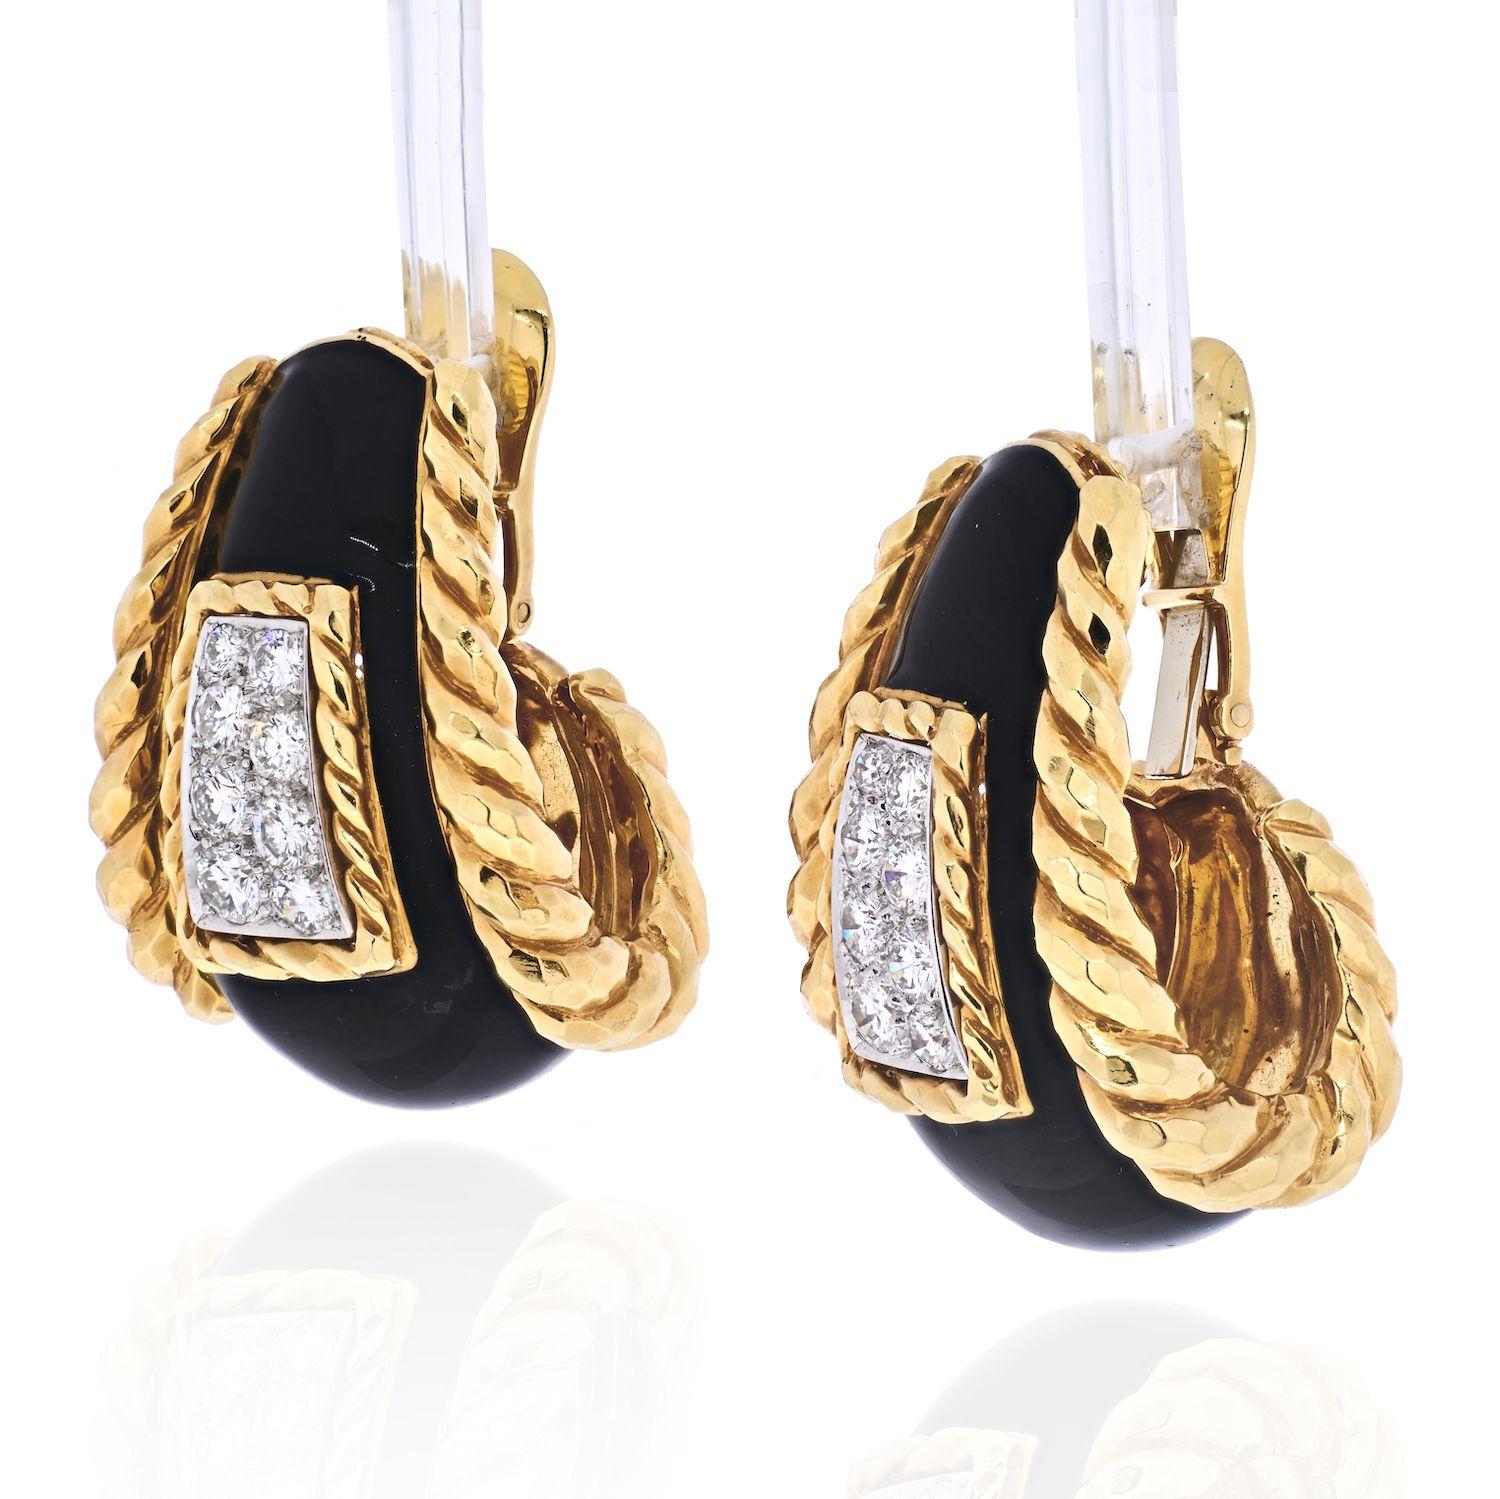 Stunning David Webb shrimp earrings crafted in 18K Yellow Gold with significant black enameling and brilliant round cut diamonds in the center. Large rope like edges complete the look with the signature touch.
Earrings are 35mm long and clip on